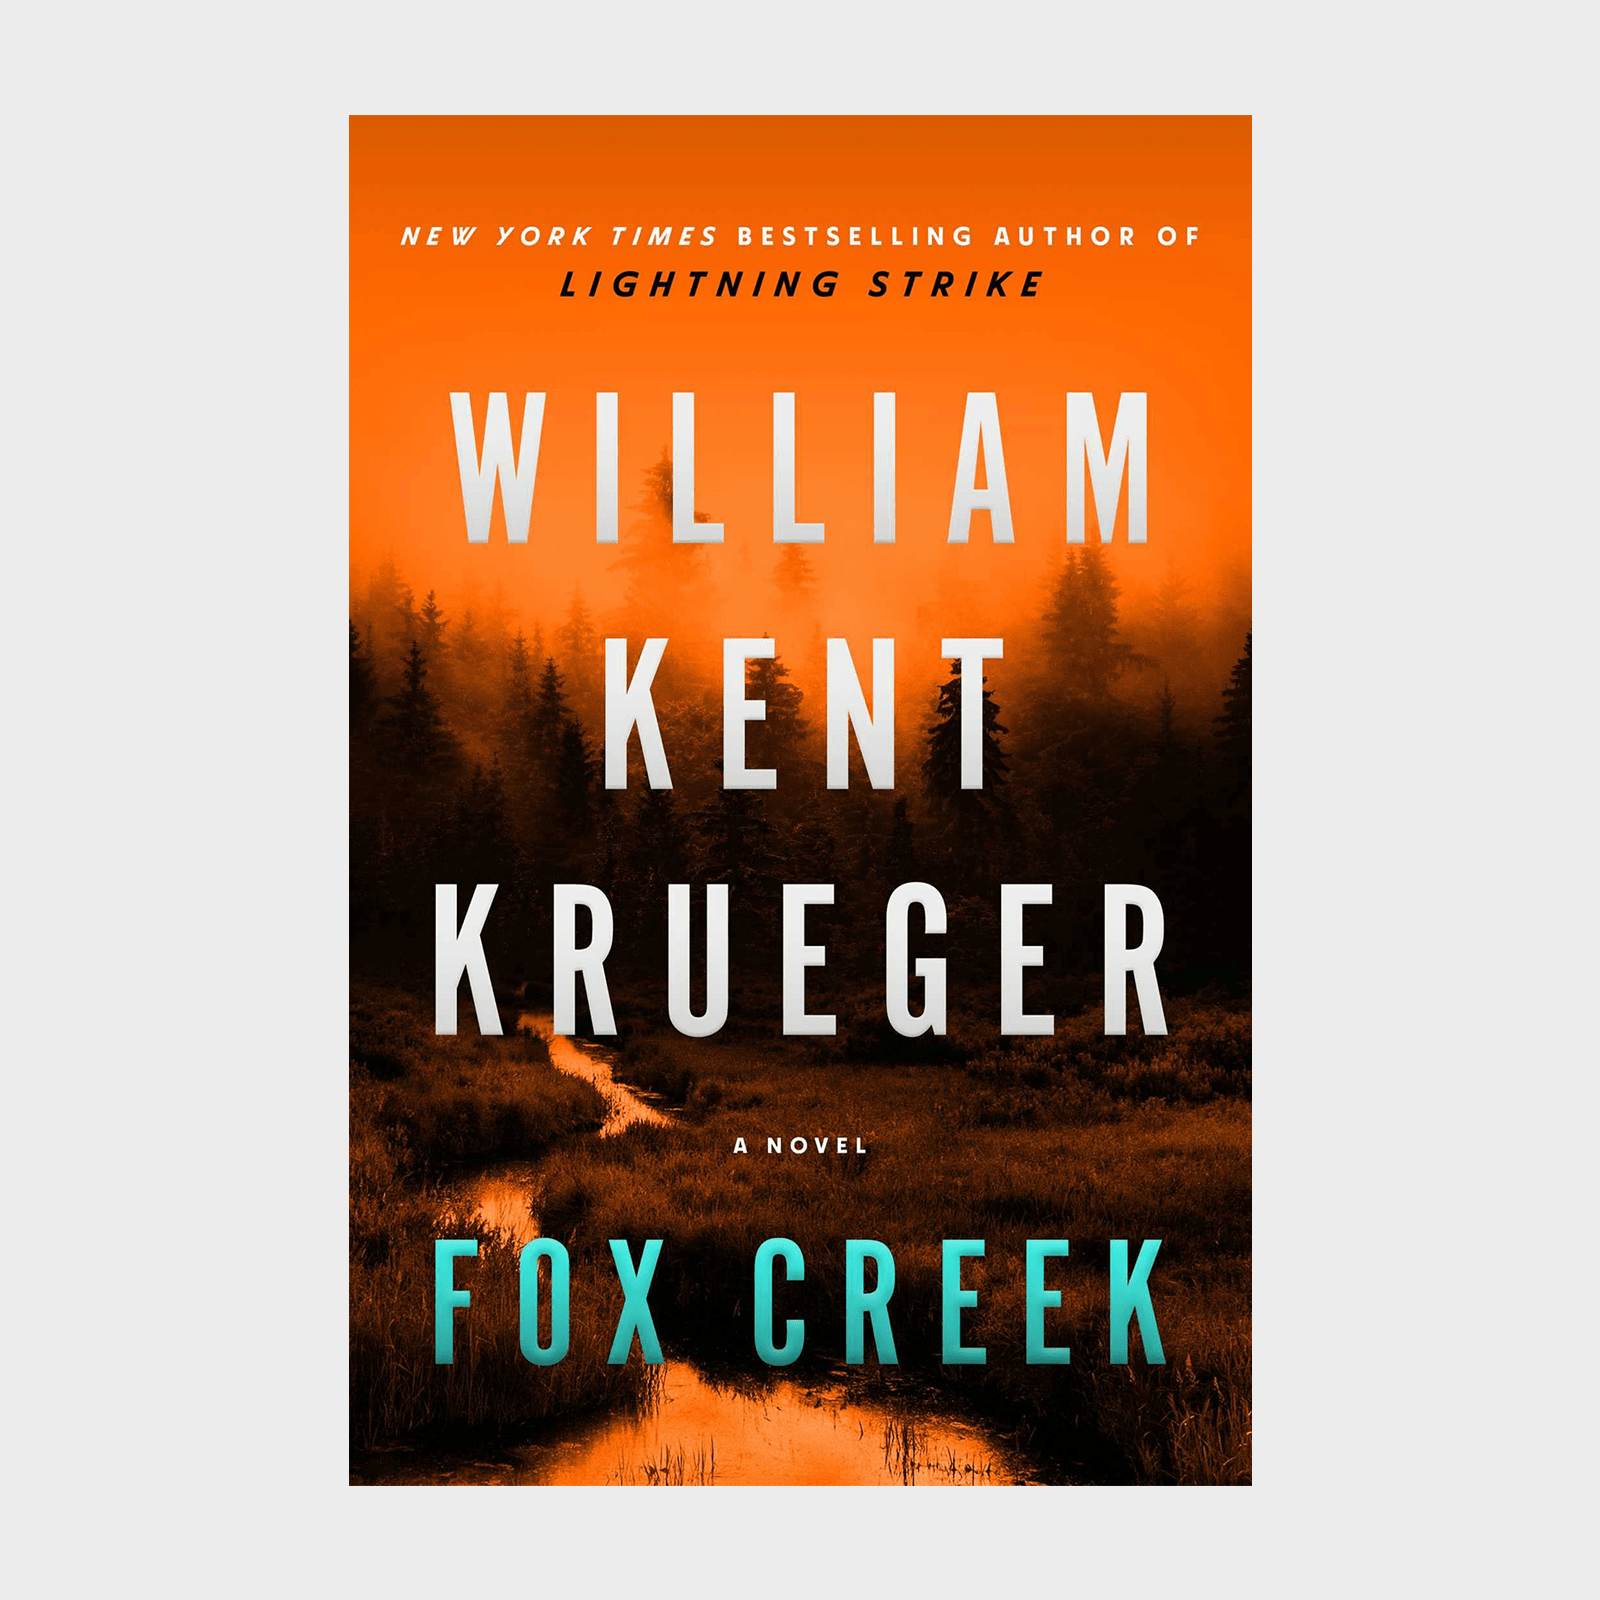 <p><strong>Release date:</strong> Aug. 23, 2022</p> <p>William Kent Krueger's <a href="https://www.amazon.com/Fox-Creek-Novel-OConnor-Mystery/dp/1982128712" rel="noopener noreferrer">latest nail-biting thriller</a> plops readers into the Boundary Waters, where hunters have swarmed in search of a woman named Dolores Morriseau. She herself seeks a haven with a local Ojibwe healer. Told from multiple perspectives, the book weaves together drama, mystery and masterful <a href="https://www.rd.com/list/native-american-books/" rel="noopener noreferrer">Native American storytelling</a>.</p> <p class="listicle-page__cta-button-shop"><a class="shop-btn" href="https://www.amazon.com/Fox-Creek-Novel-OConnor-Mystery/dp/1982128712">Shop Now</a></p>